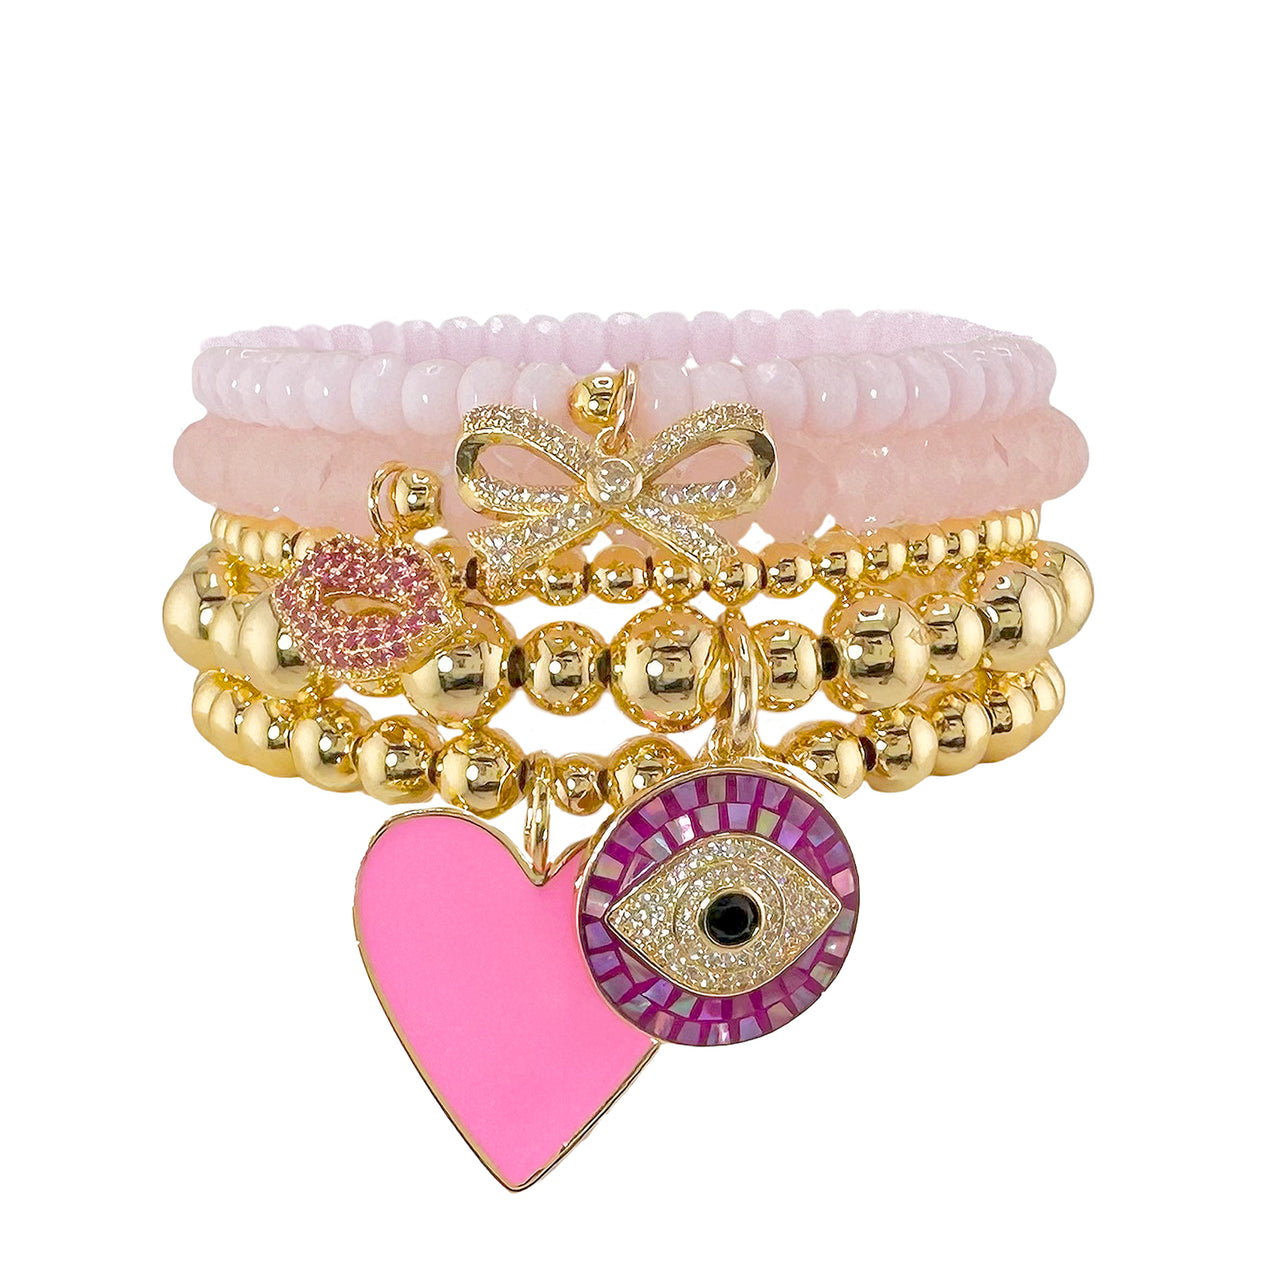 Marcia Love Collection of Bracelets